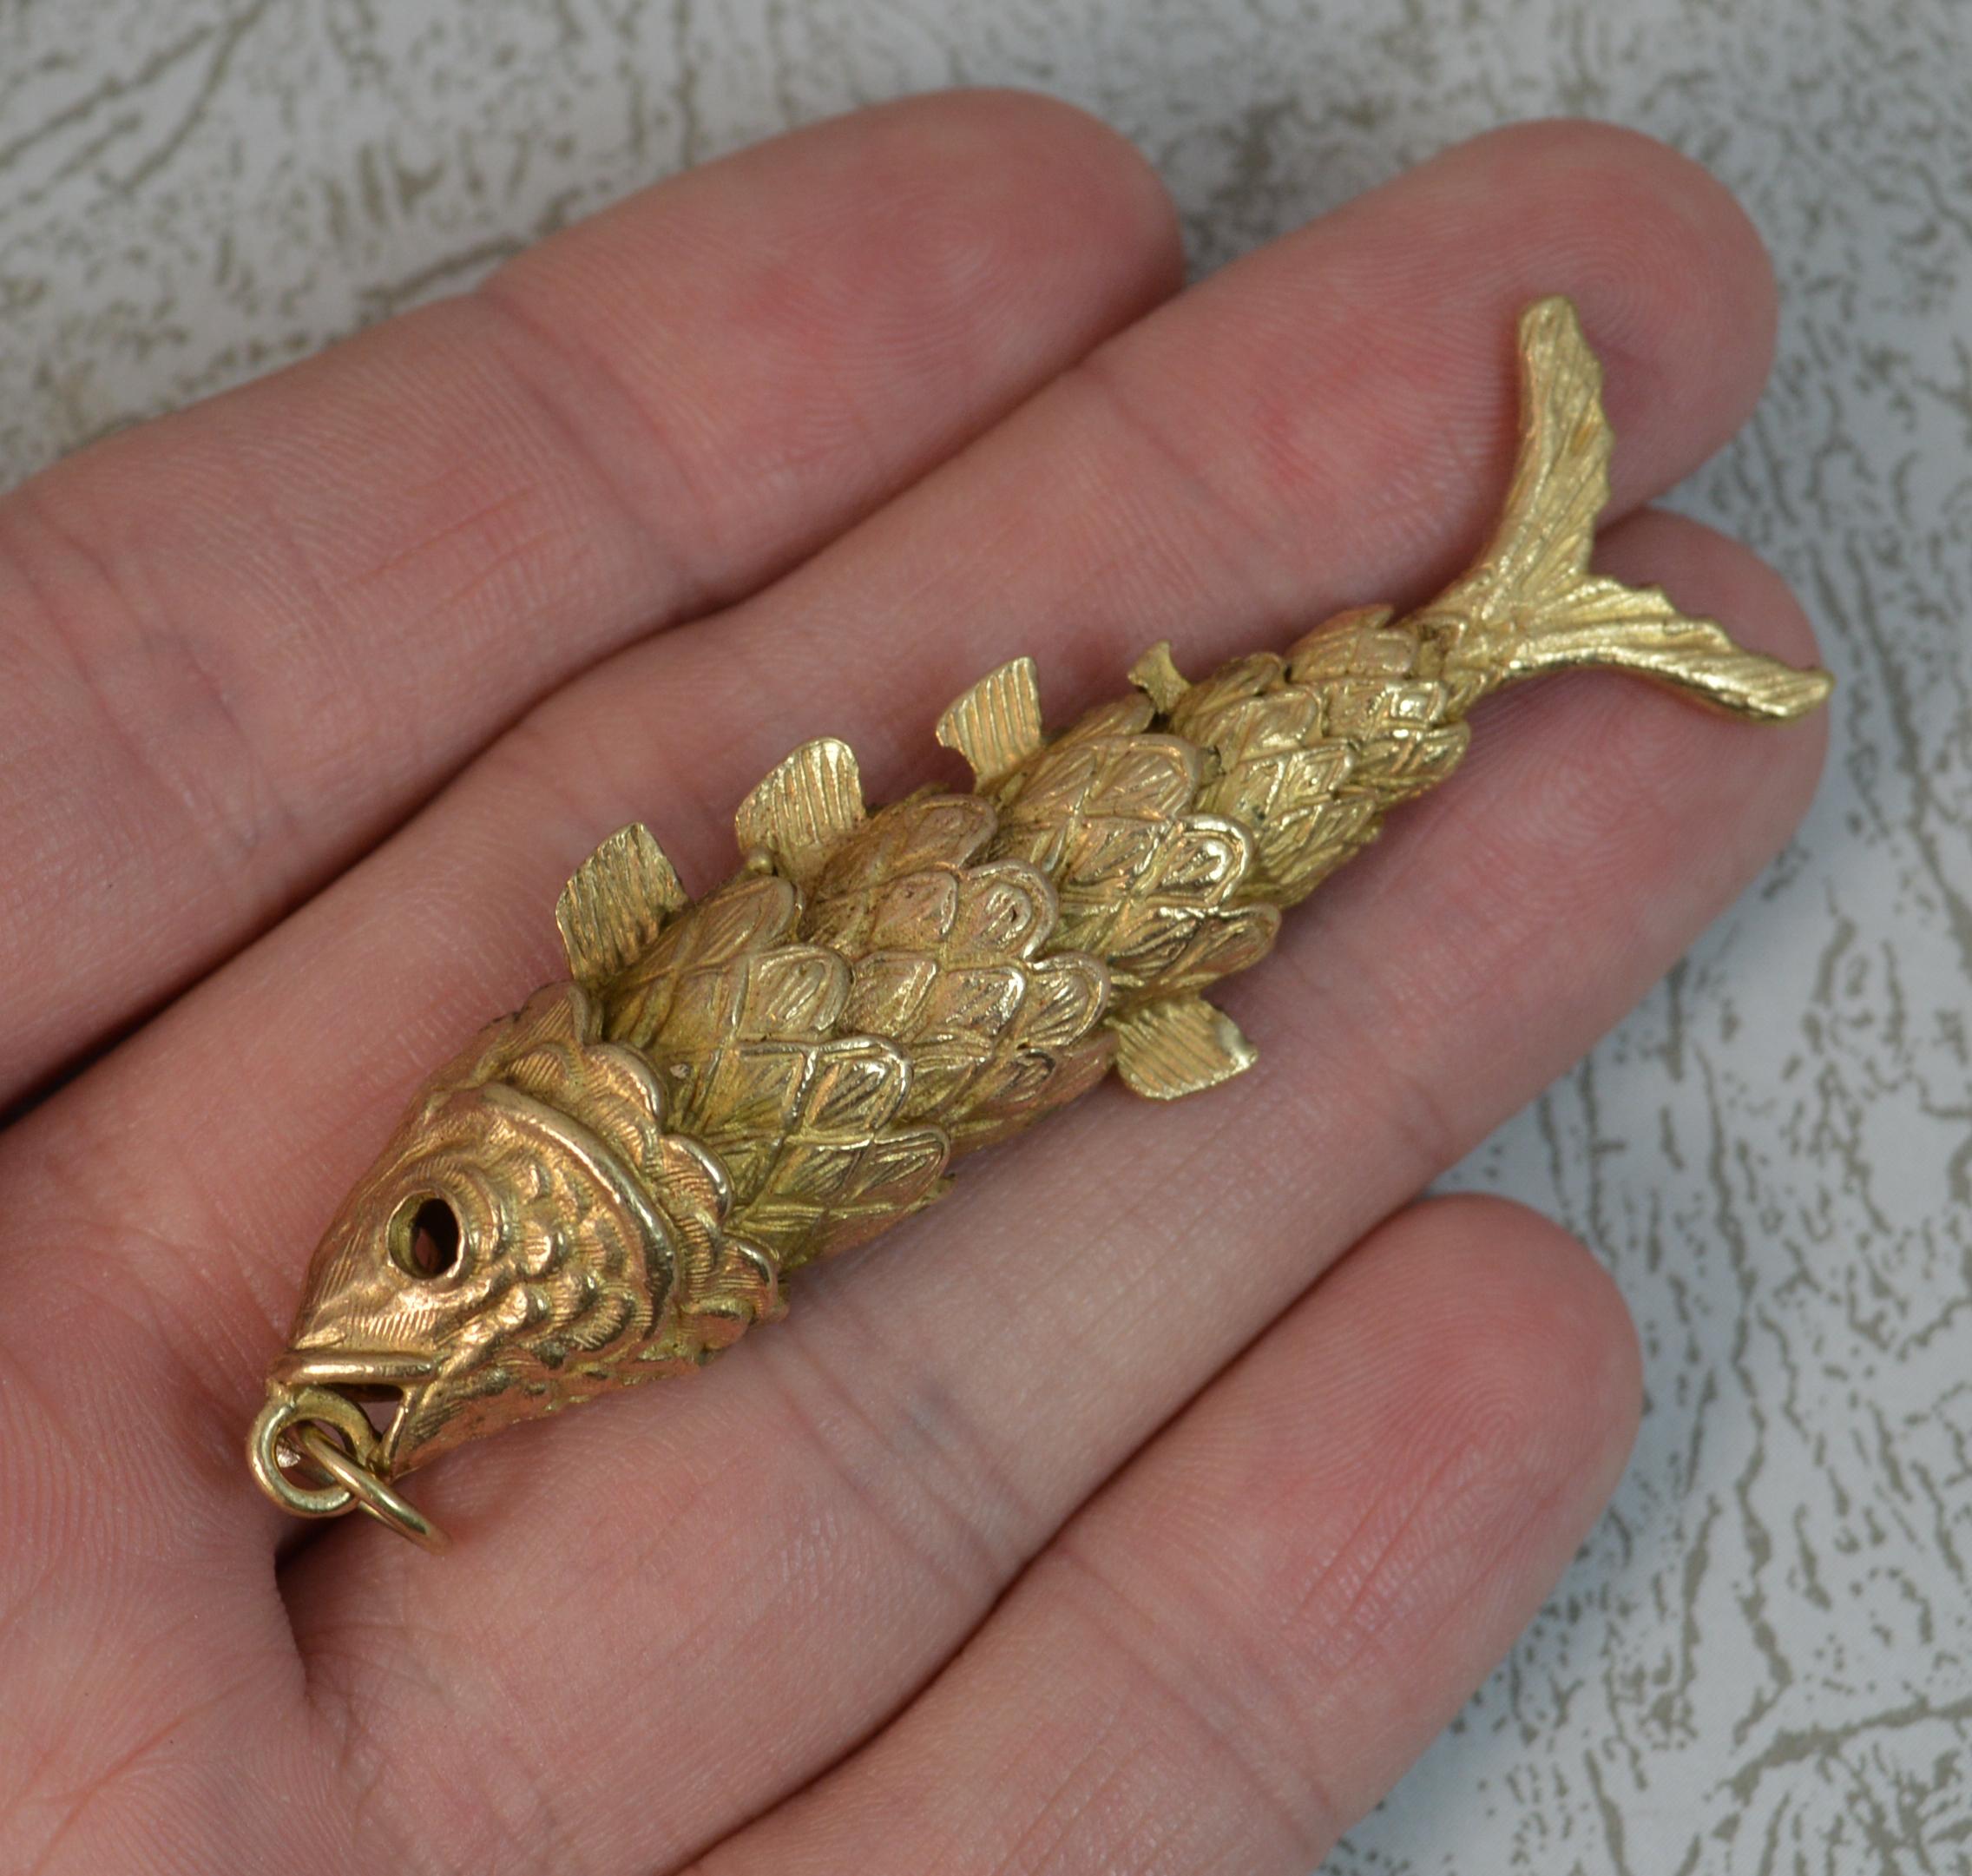 A 9 carat yellow gold pendant.
Designed as an articulated fish.
Well made, good gauge.

Condition ; Very good. Crisp design. Well articulated. Clear hallmarks. Issue free.

Please view photographs though note they are significantly bigger than the